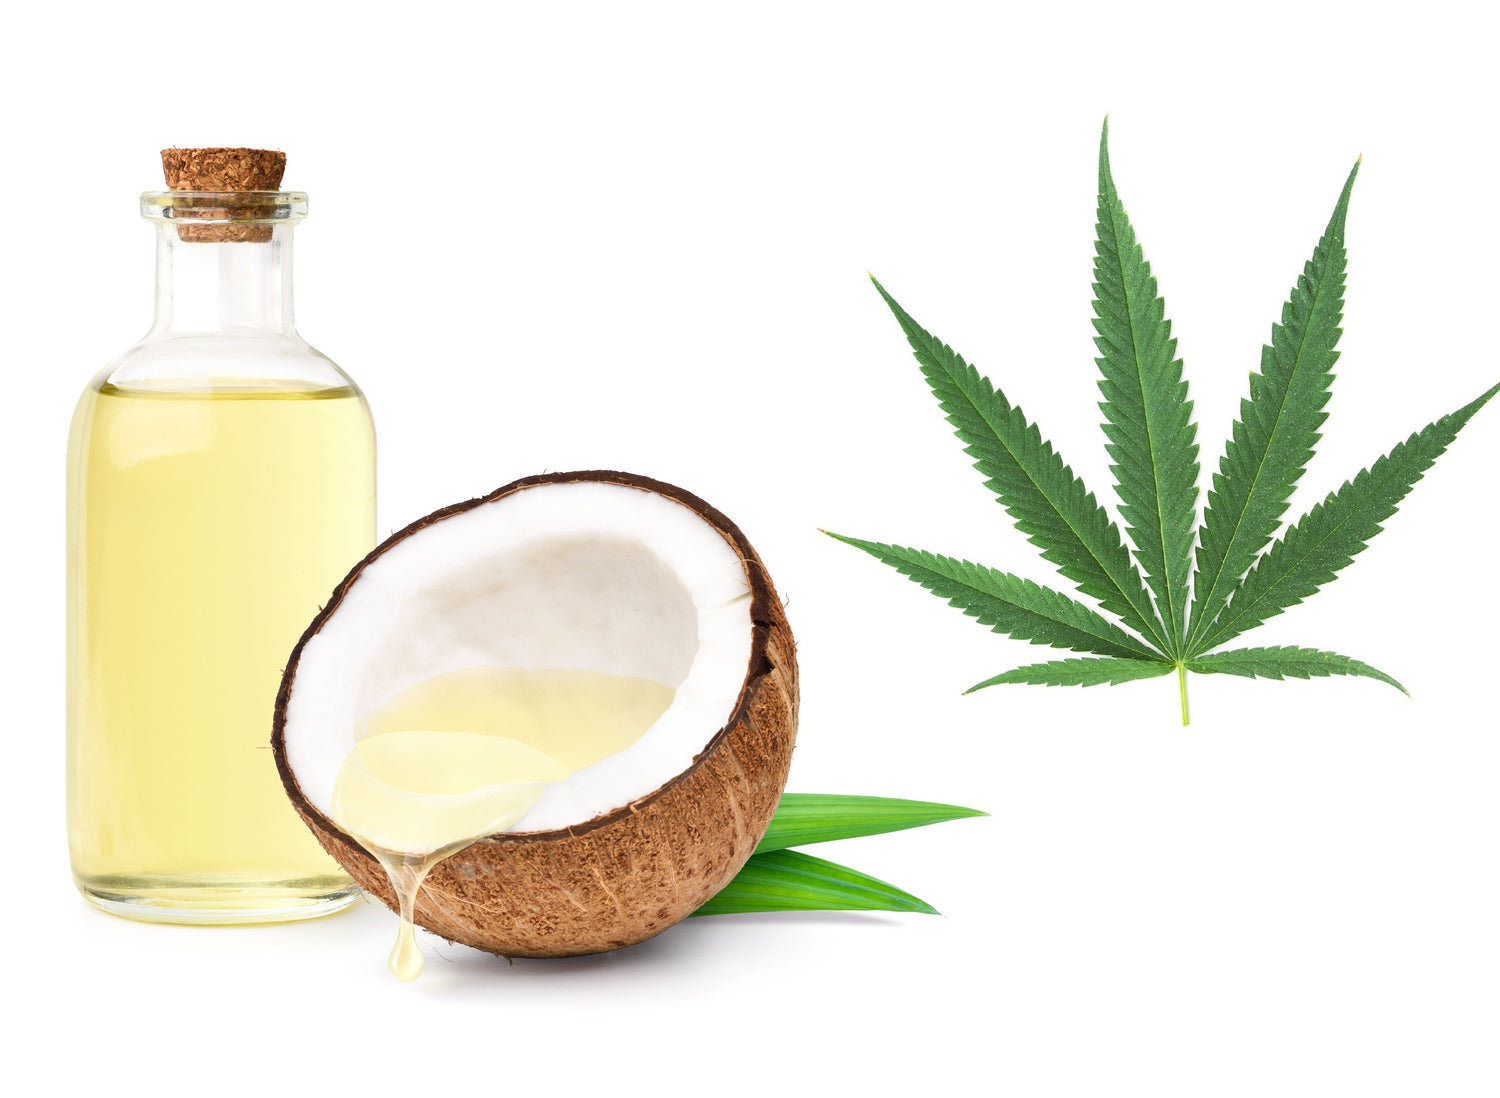 How to Make Cannabis Infused Coconut Oil